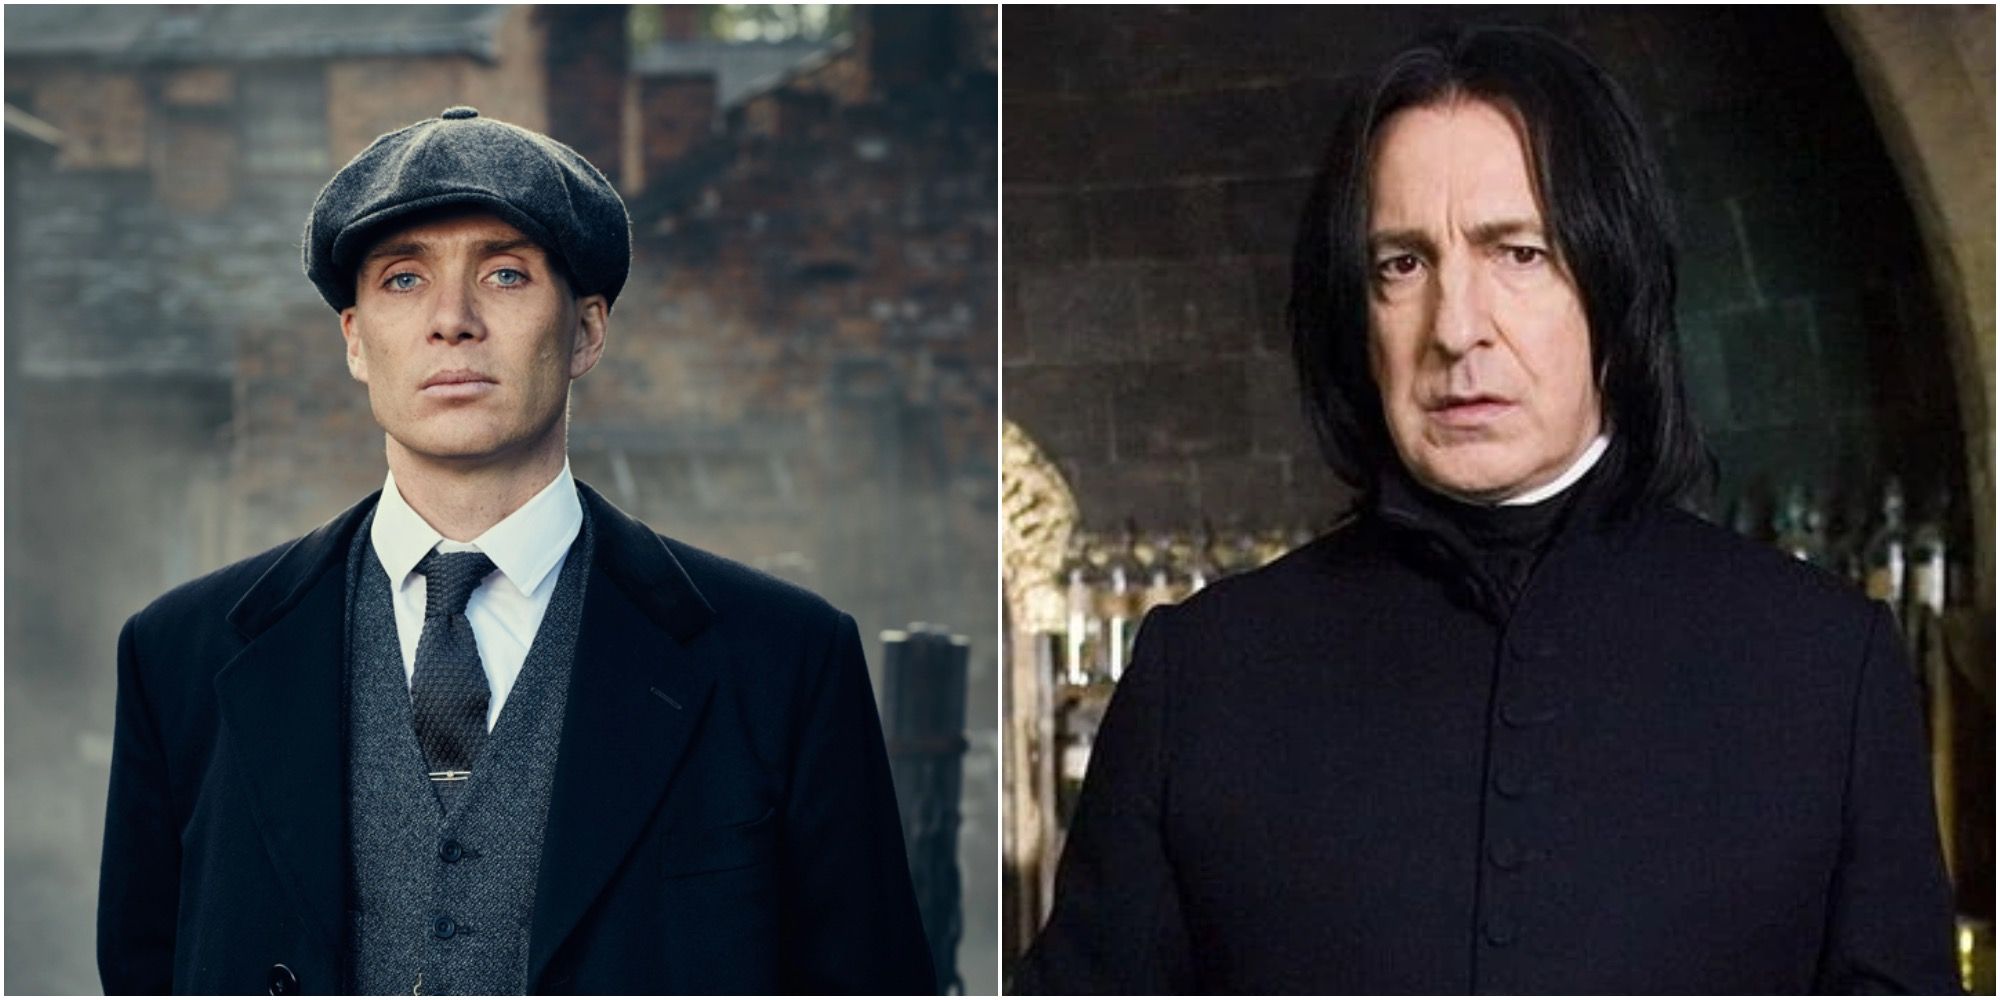 Split image of Tommy Shelby (Peaky Blinders) and Severus Snape (Harry Potter)